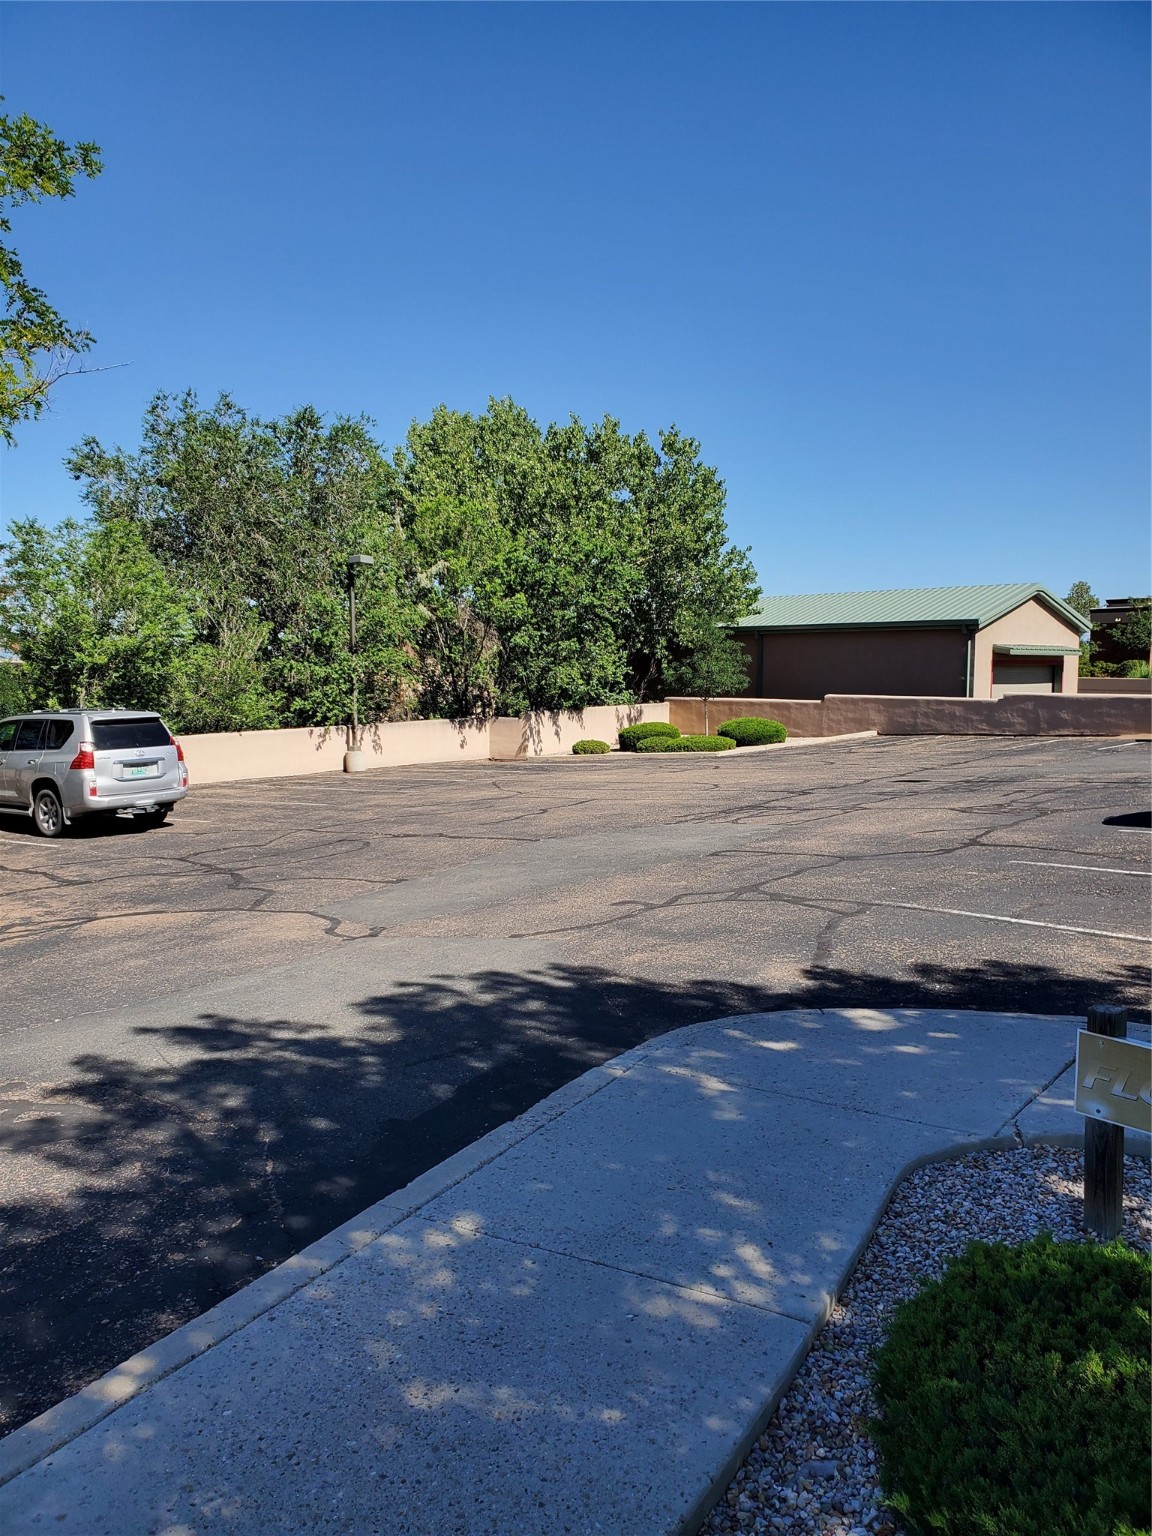 683 Harkle Rd, Santa Fe, New Mexico 87505, ,Commercial Lease,For Rent,683 Harkle Rd,202232523